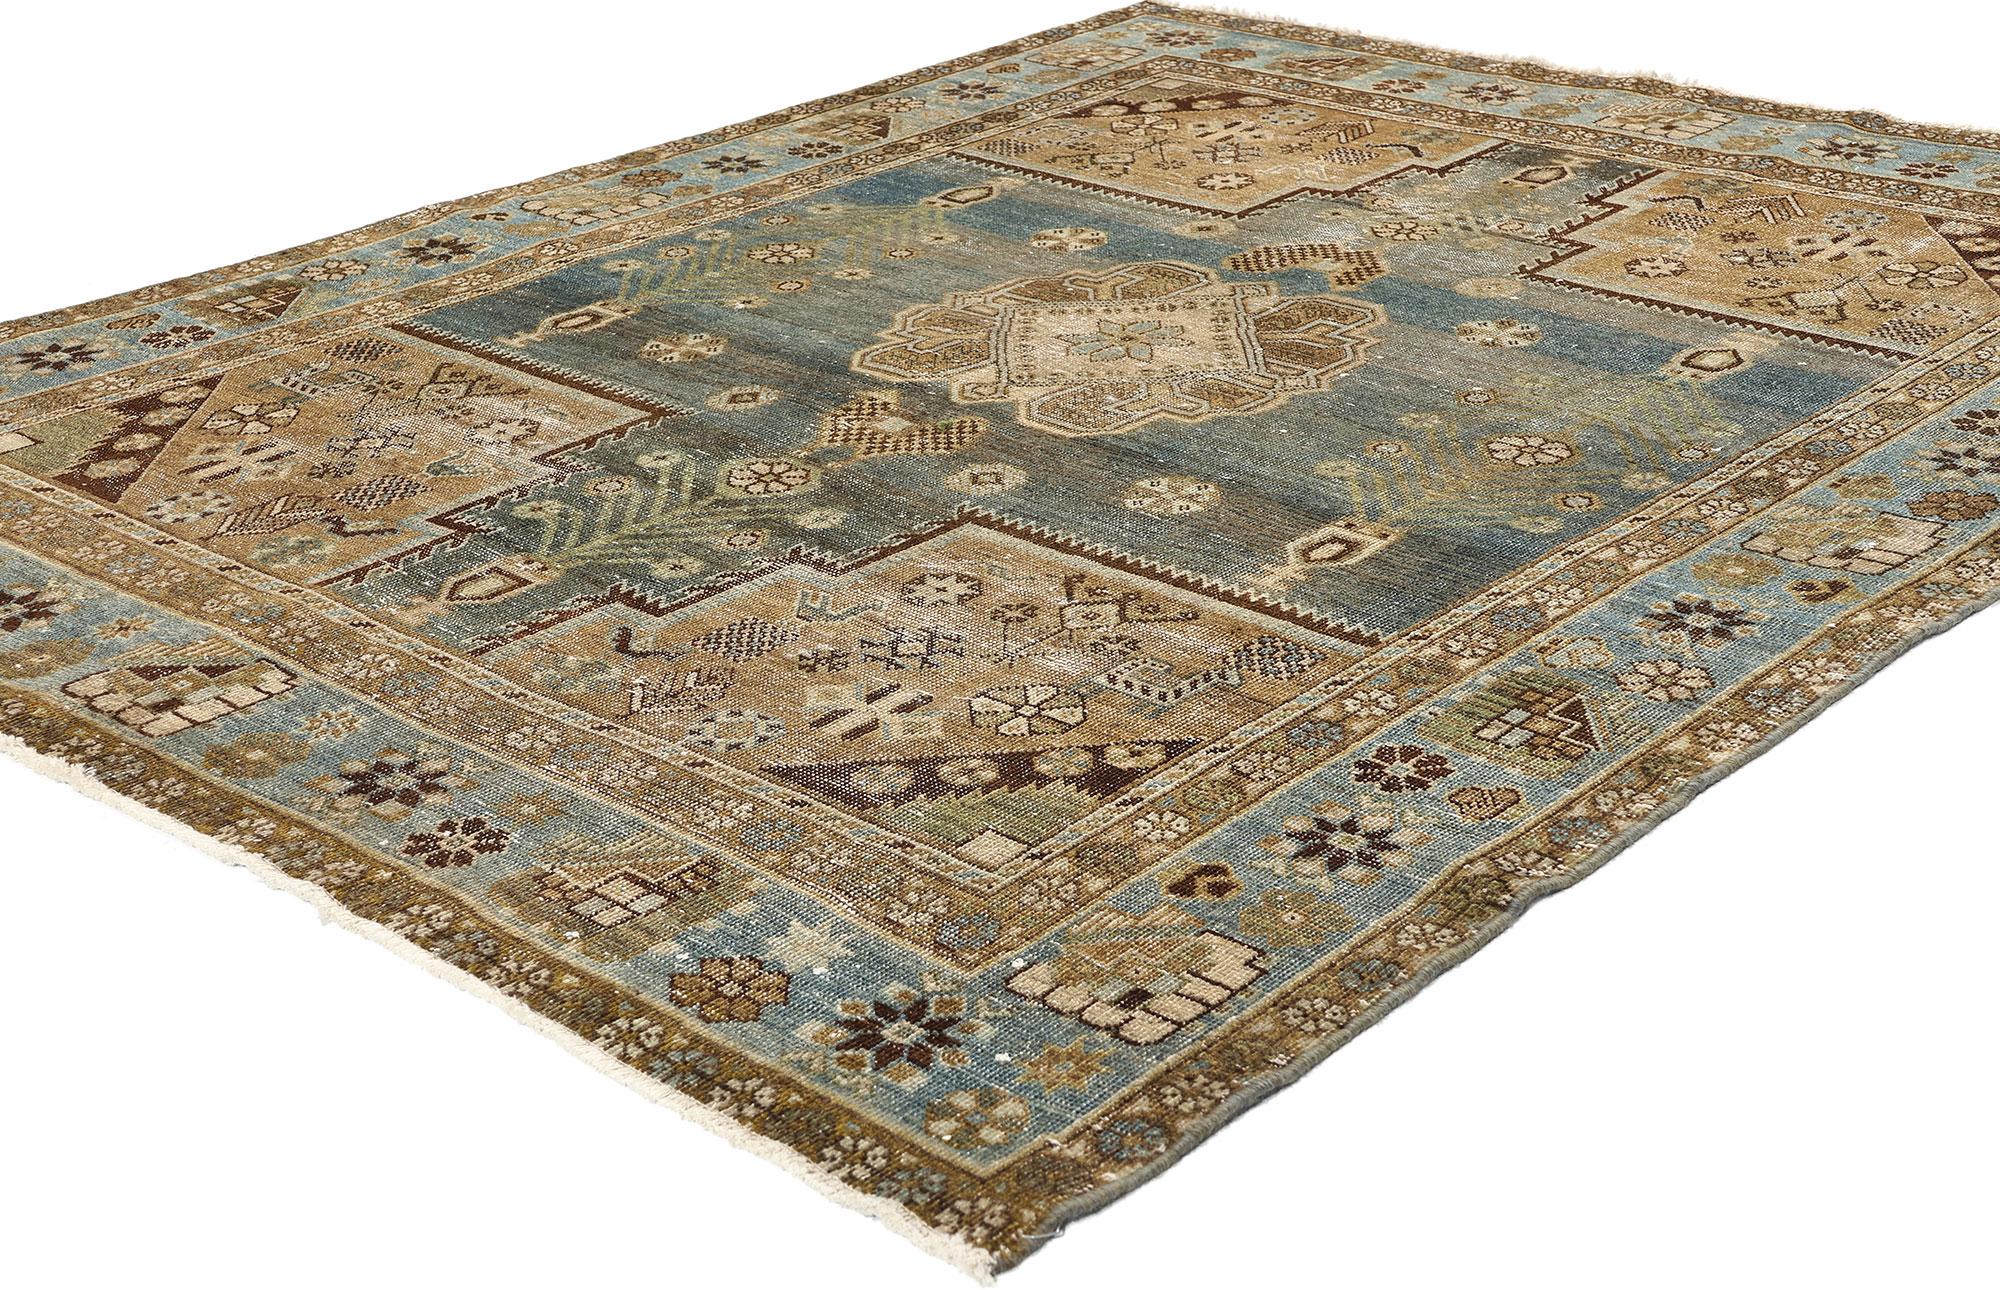 60922 Antique Persian Afshar Rug, 05'02 x 06'06. Antique-washed Persian Afshar rugs, originating from the Afshar tribe in Iran, offer a modern twist on traditional craftsmanship. These Persian rugs feature faded geometric designs, soft color